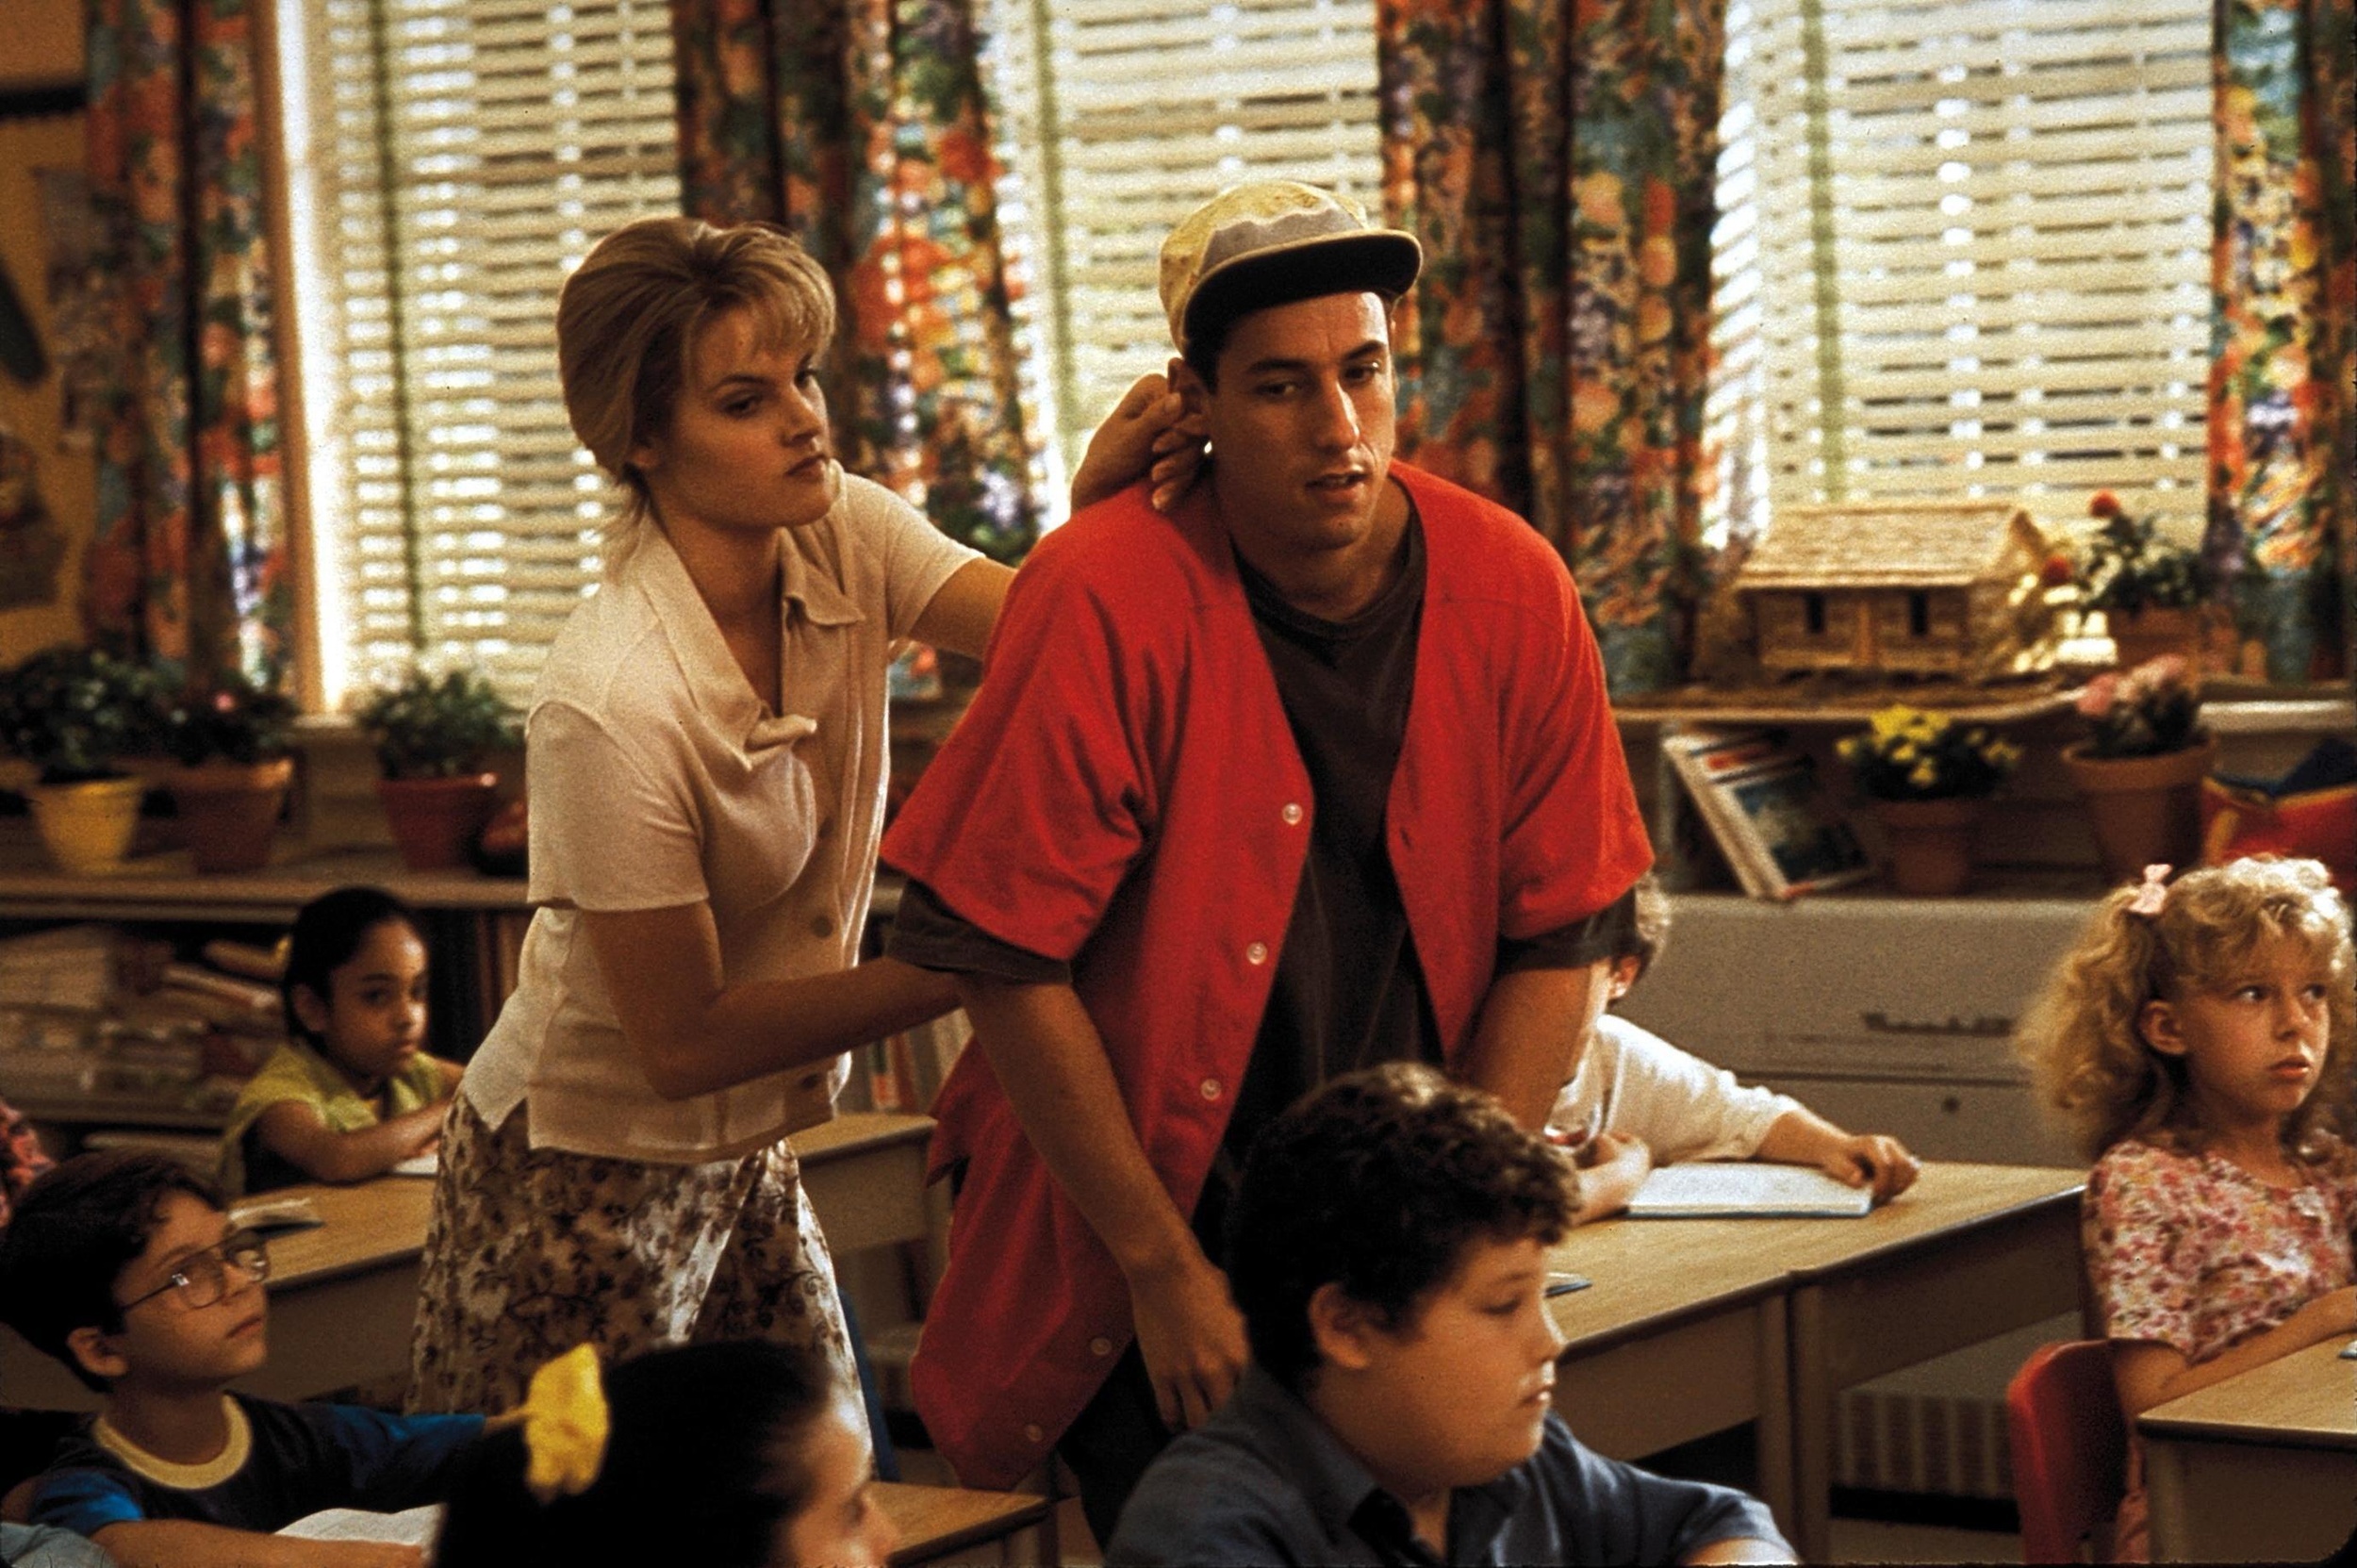 <p><span>Roughly 69% of all '90s kids' personalities were based on watching Adam Sandler movies in the ‘90s.</span></p><p>You may also like: <a href='https://www.yardbarker.com/entertainment/articles/the_most_memorable_quotes_from_the_star_wars_films_012524/s1__38957507'>The most memorable quotes from the 'Star Wars' films</a></p>